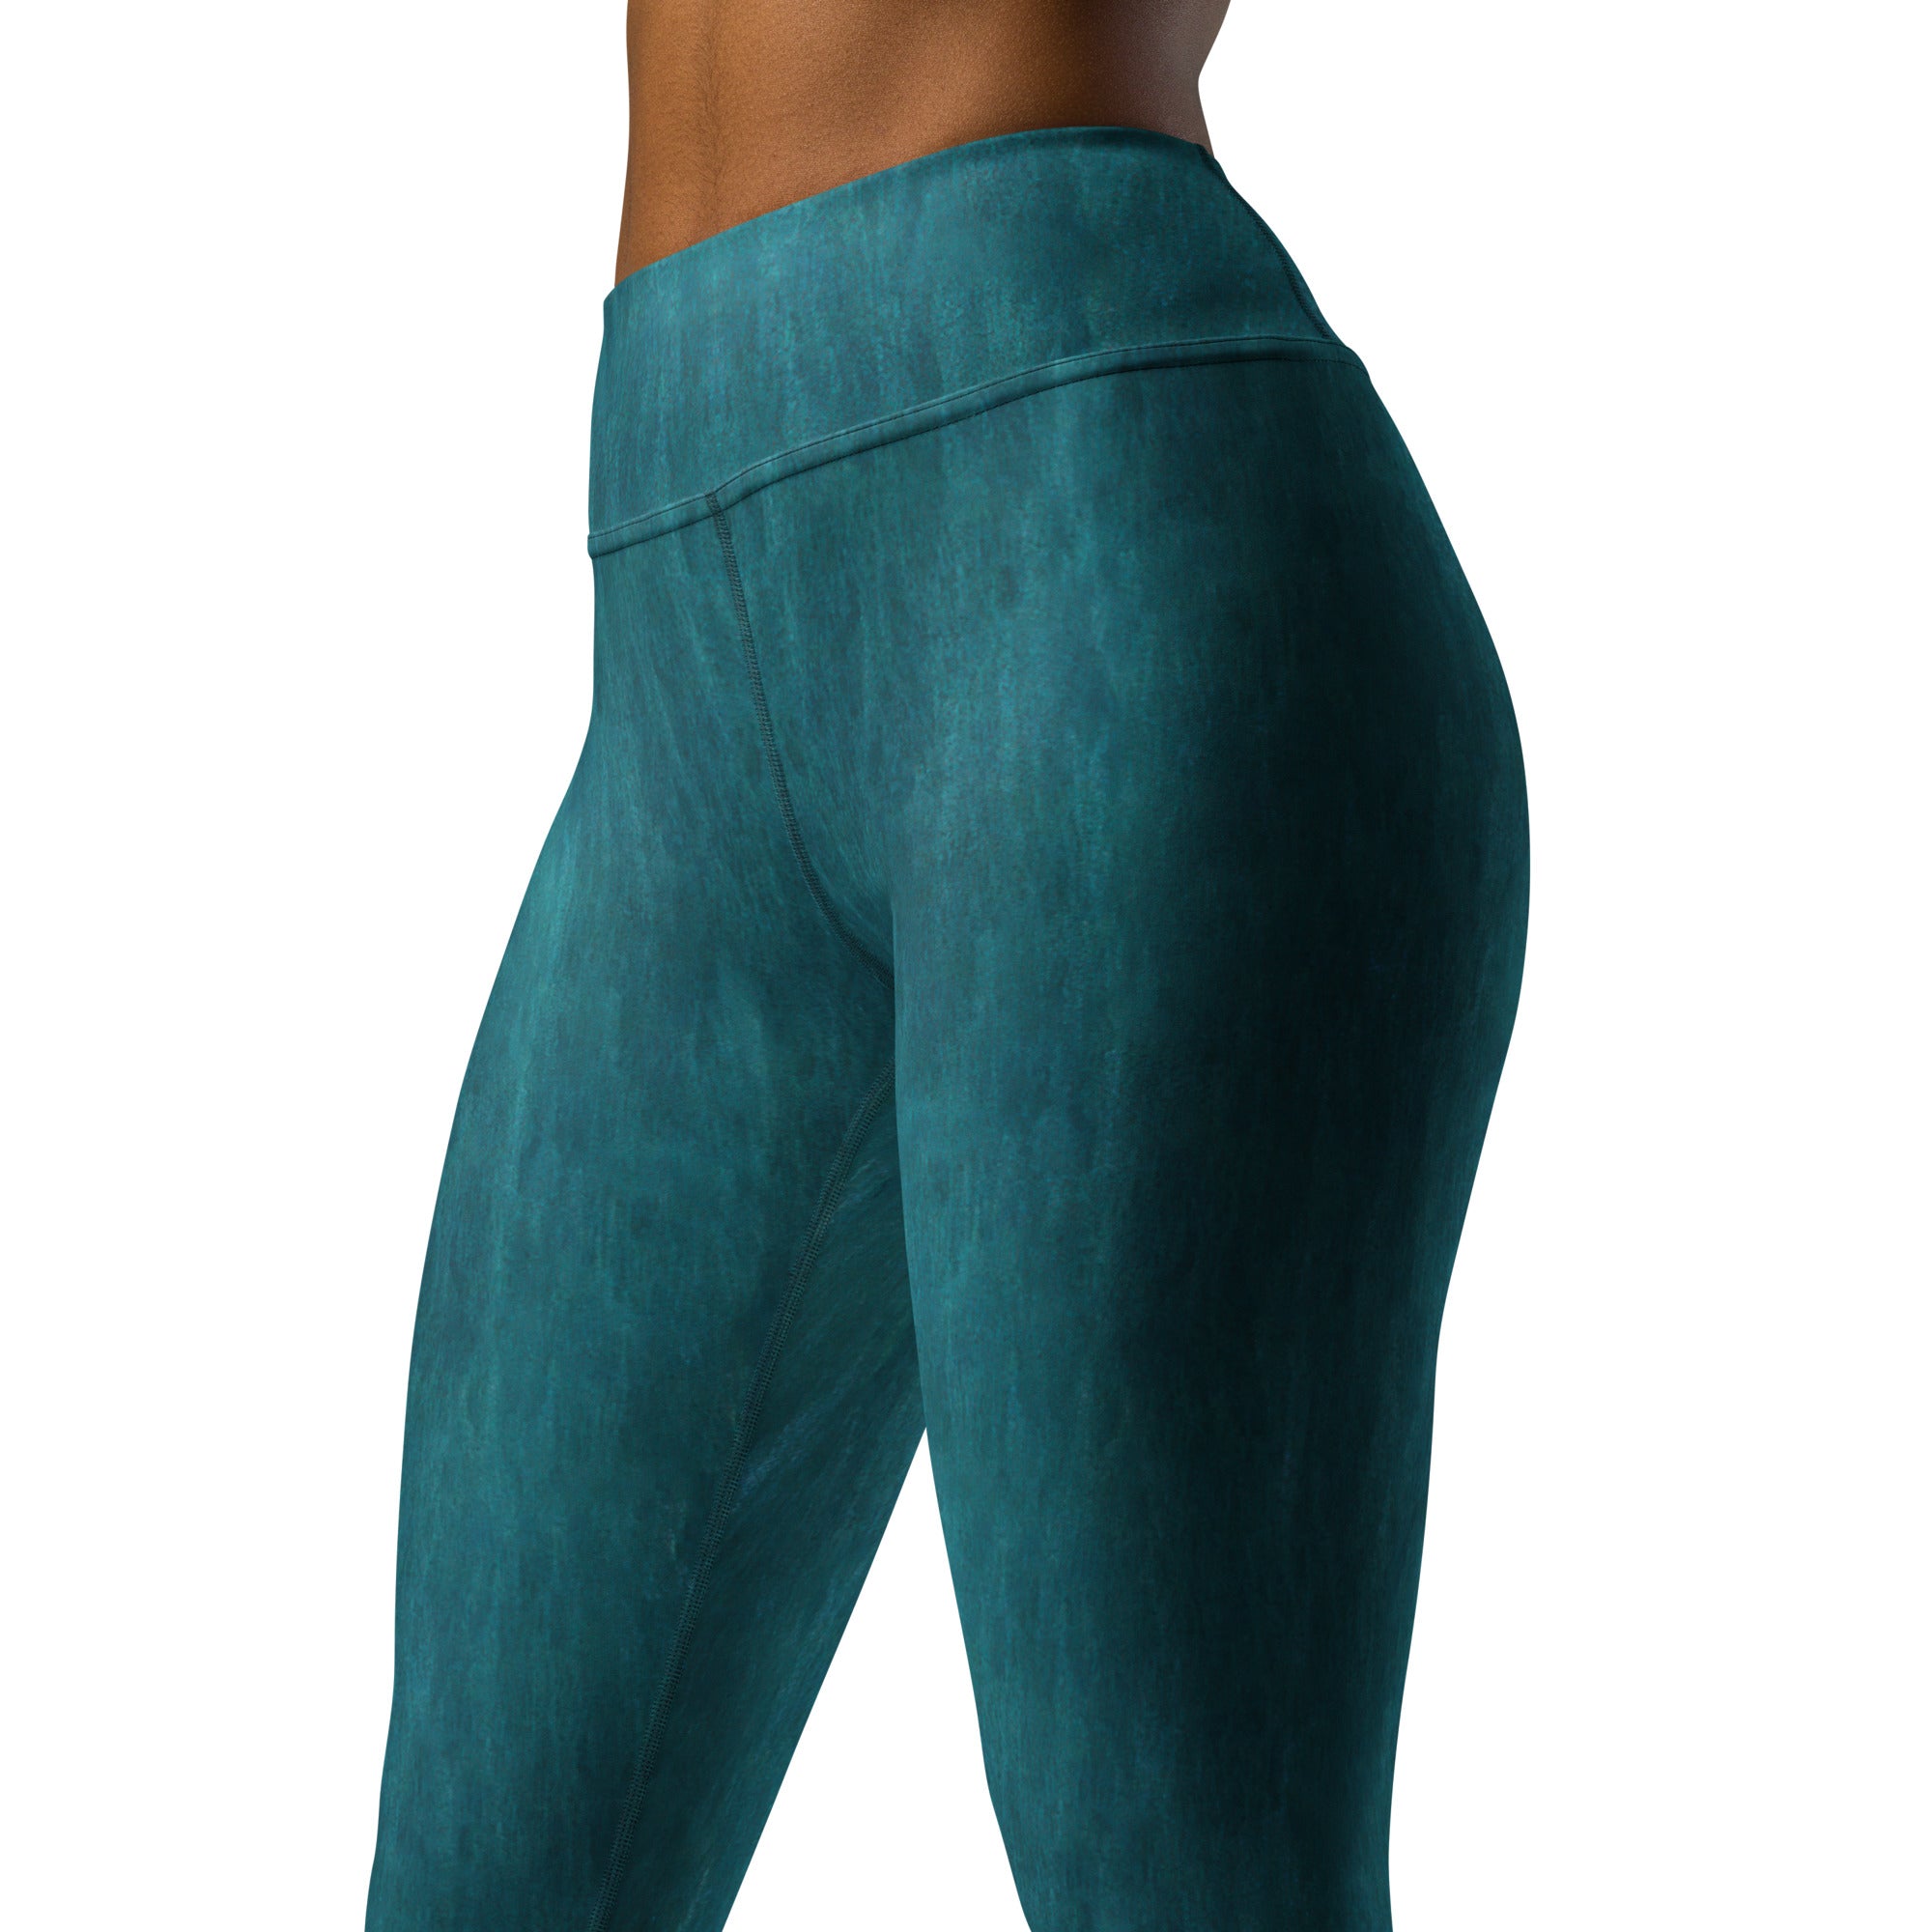 Cable Knit Zen Yoga Leggings for a Comfortable Yoga Session